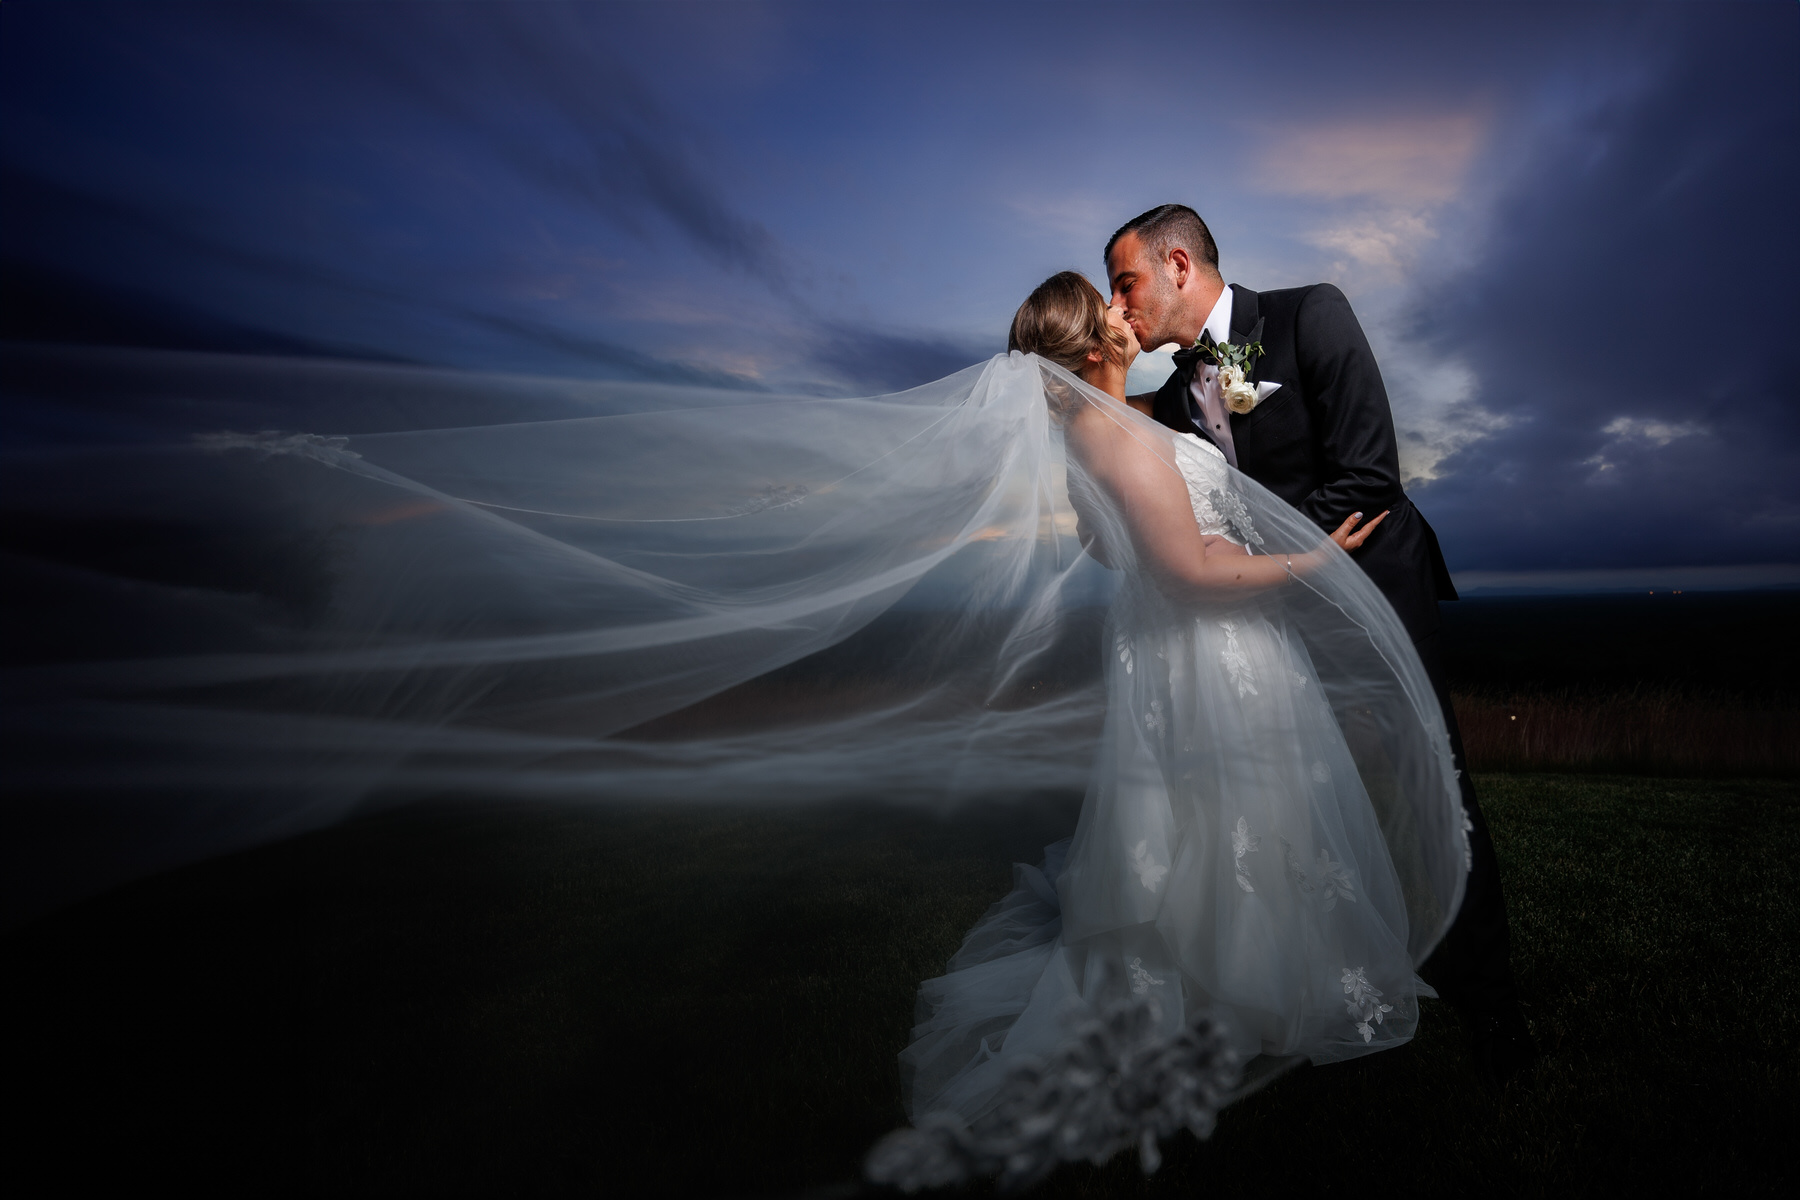 Bride and groom kissing outdoors at dusk, with the bride's long veil elegantly blowing in the wind under a dramatic cloudy sky, captured perfectly in their wedding photography.